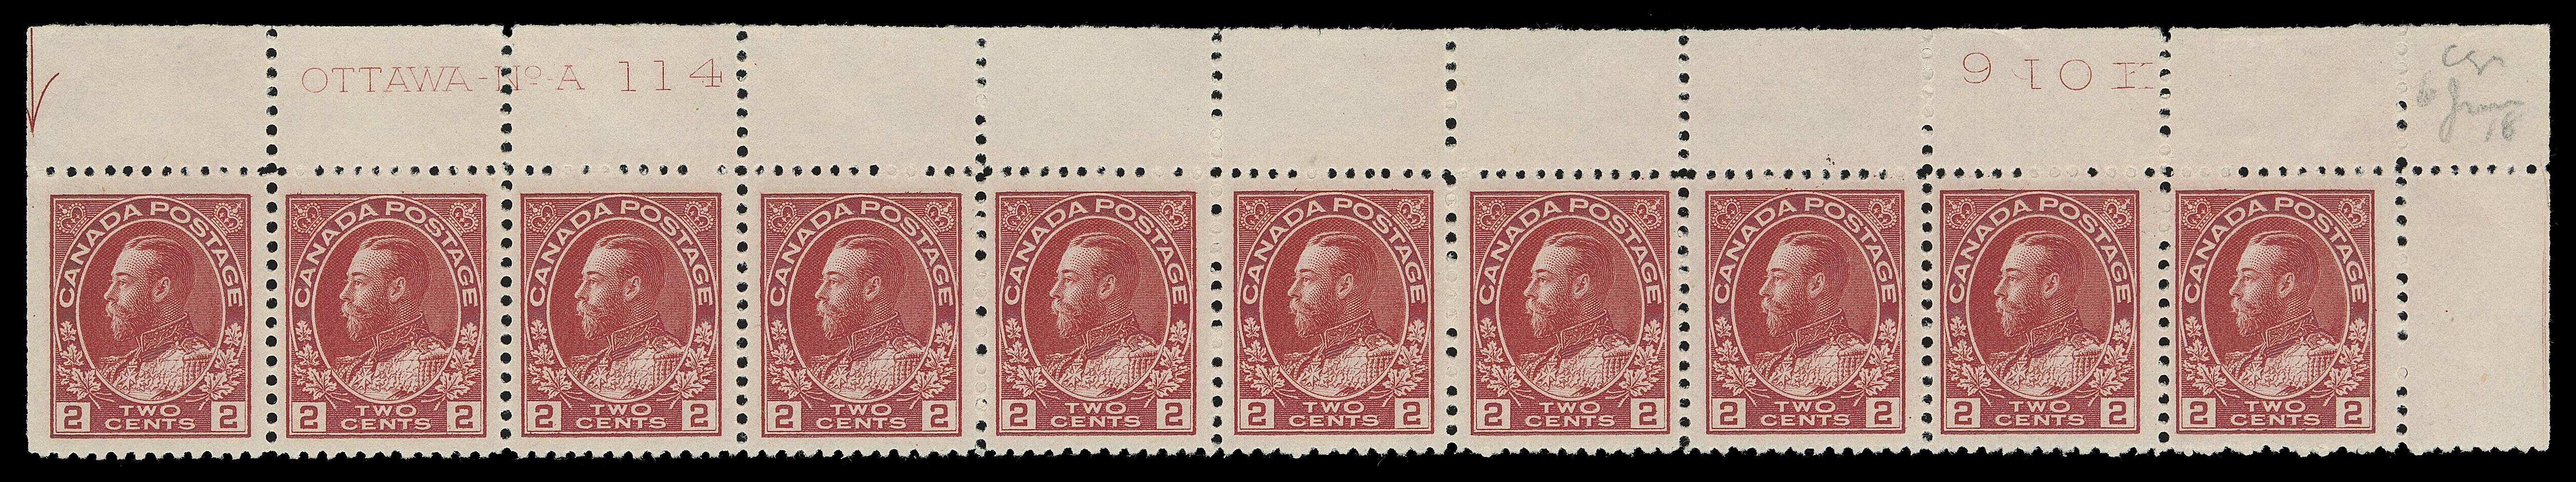 ADMIRAL STAMPS  106,Matching upper right Plate 113 & 114 strips of ten with post office fresh colour, quite well centered, hinged in ungummed portion of the selvedge only, full NH original gum, VF; each with pencil "6 Jun 18" date of acquisition. (Unitrade cat. $2,400)